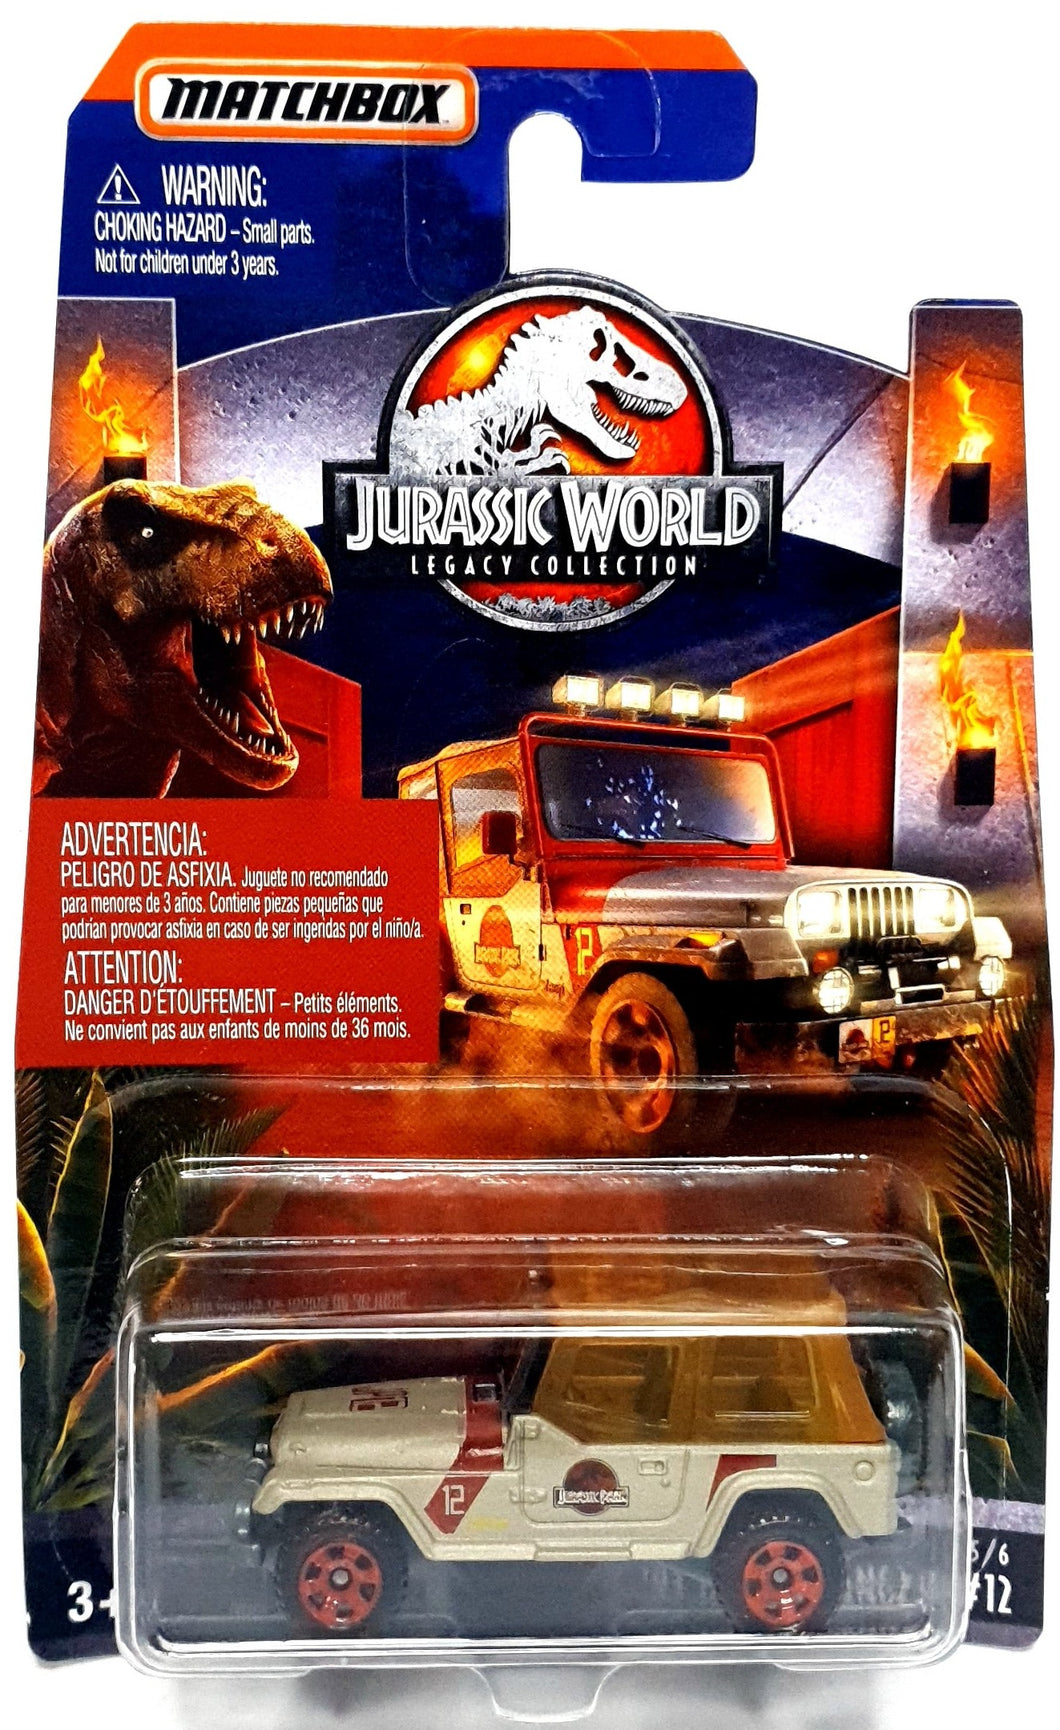 Matchbox - Jurassic World Legacy Collection Toy Vehicles Die-Cast 1 of 2 Jeep Wranglers